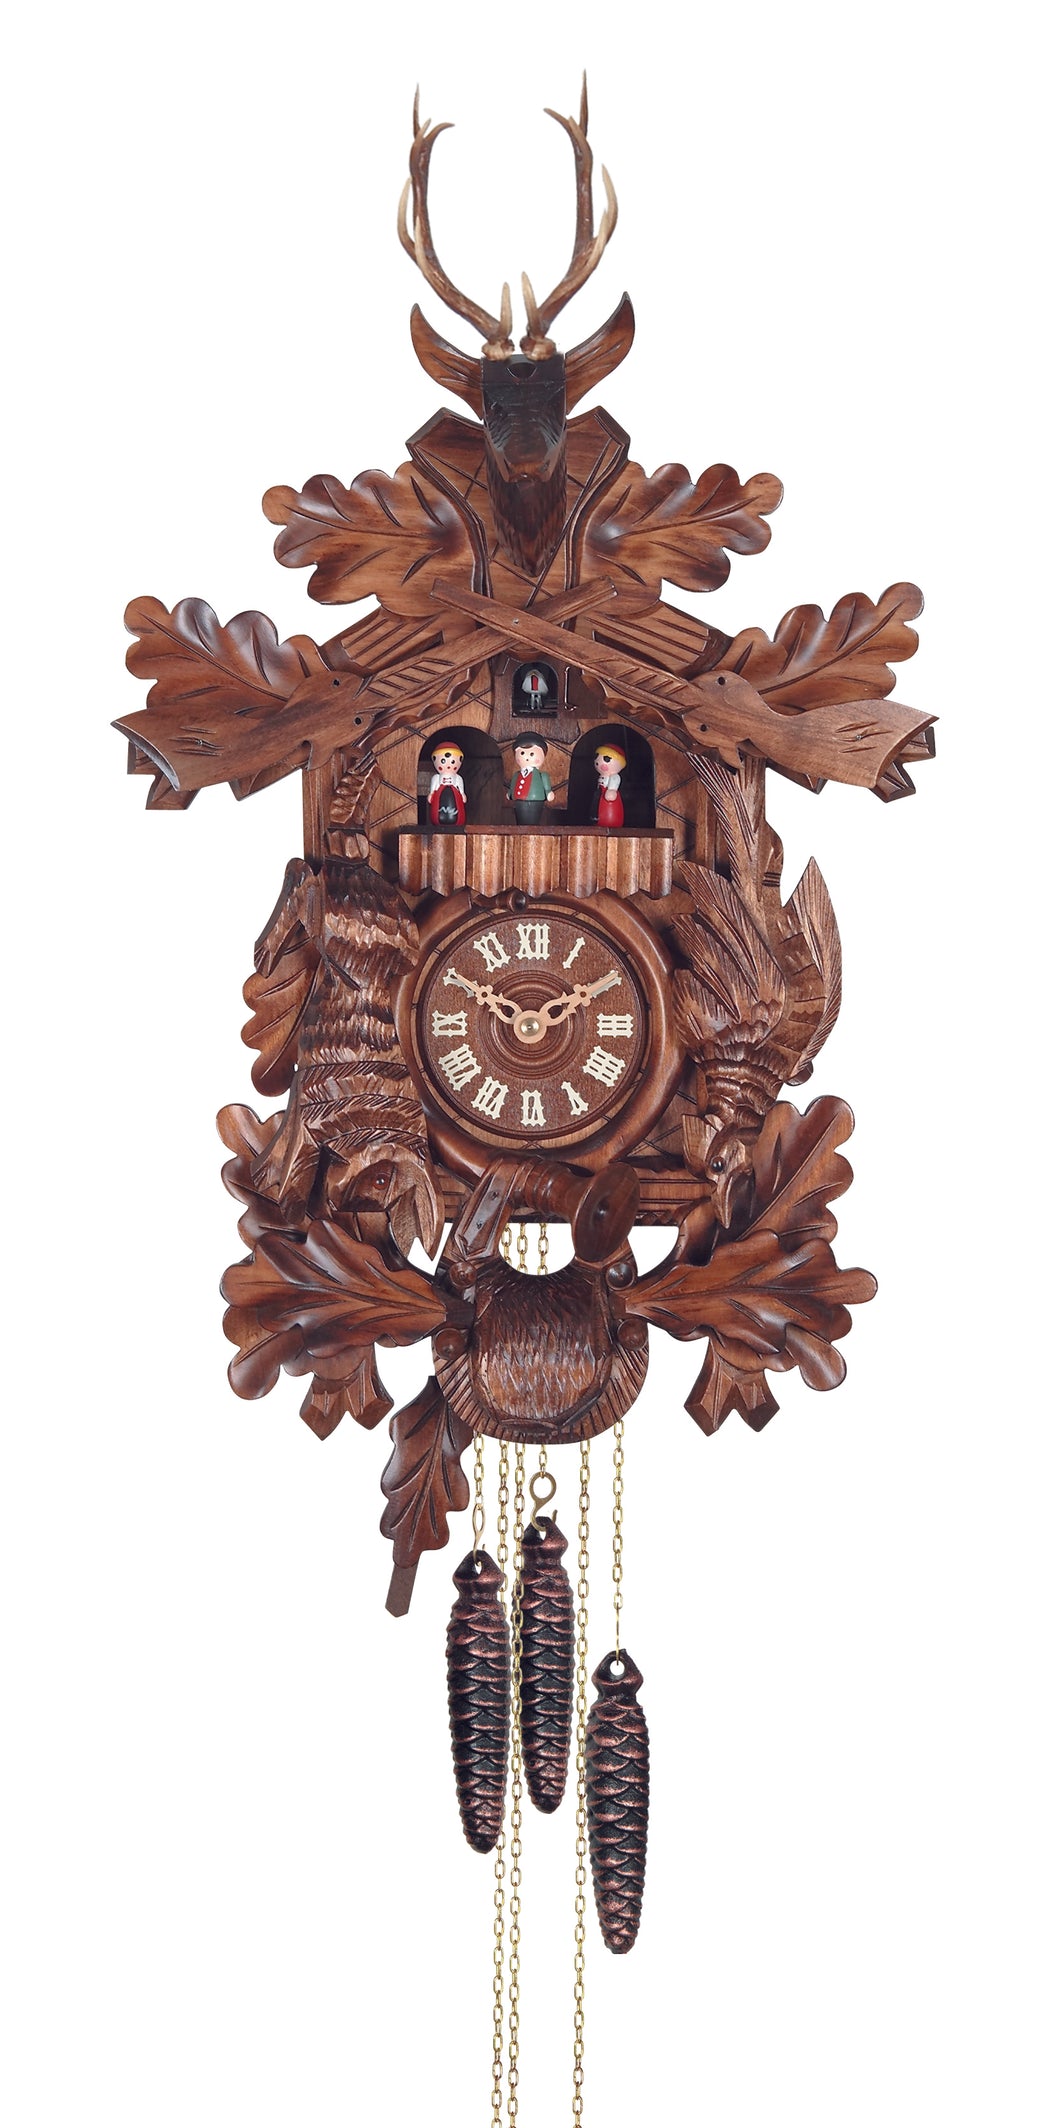 NEW - Hunters Cuckoo Clock with Music and Dancer Platform